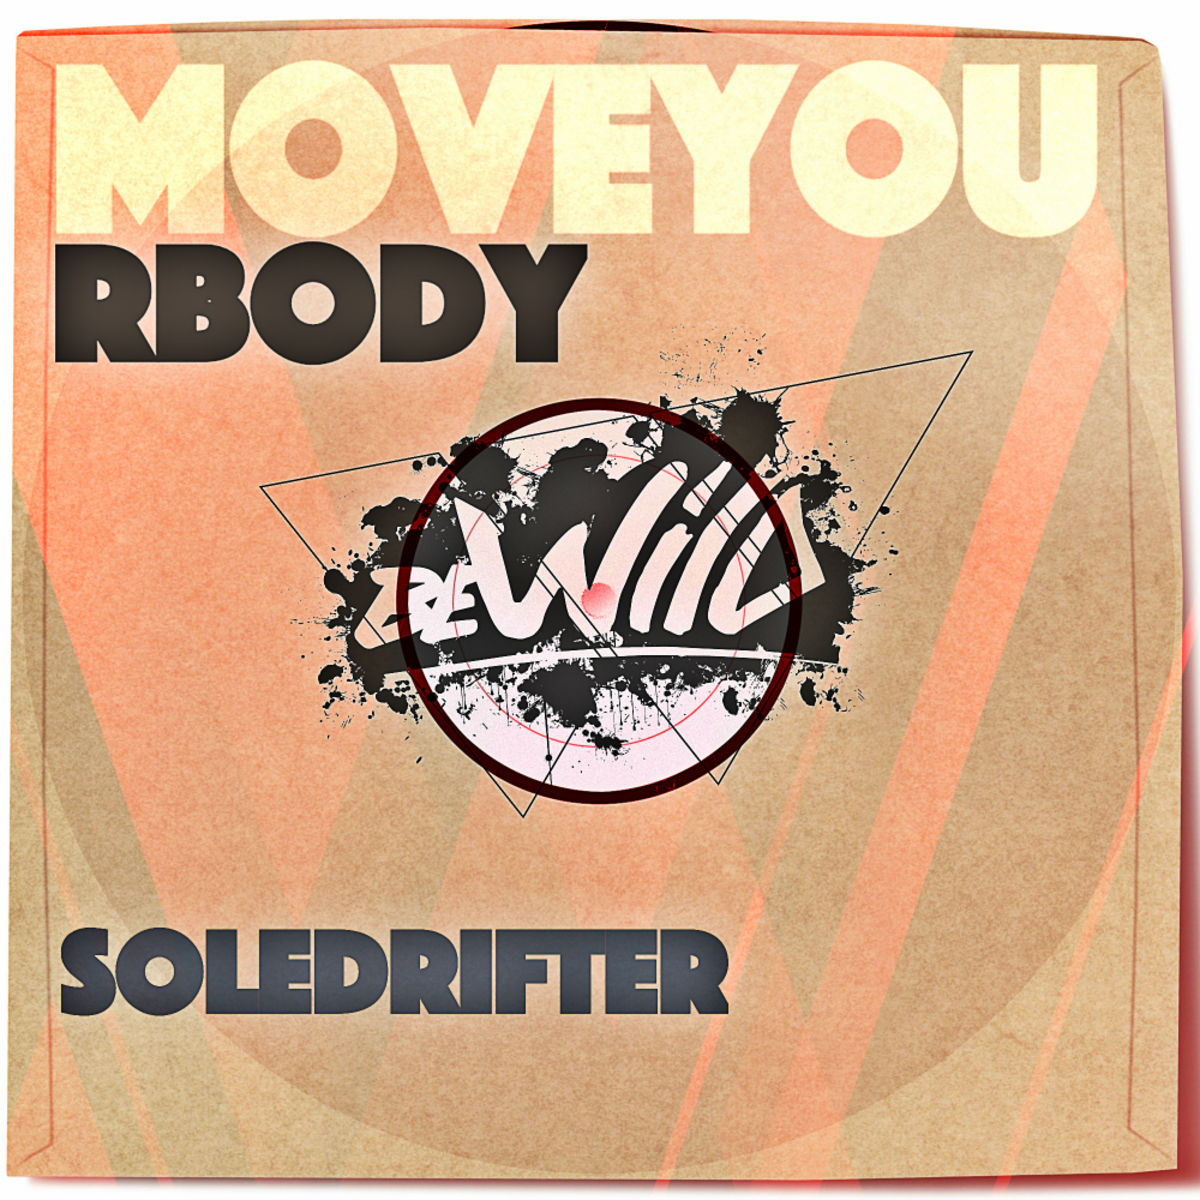 Soledrifter - Move Your Body / Bewild Records